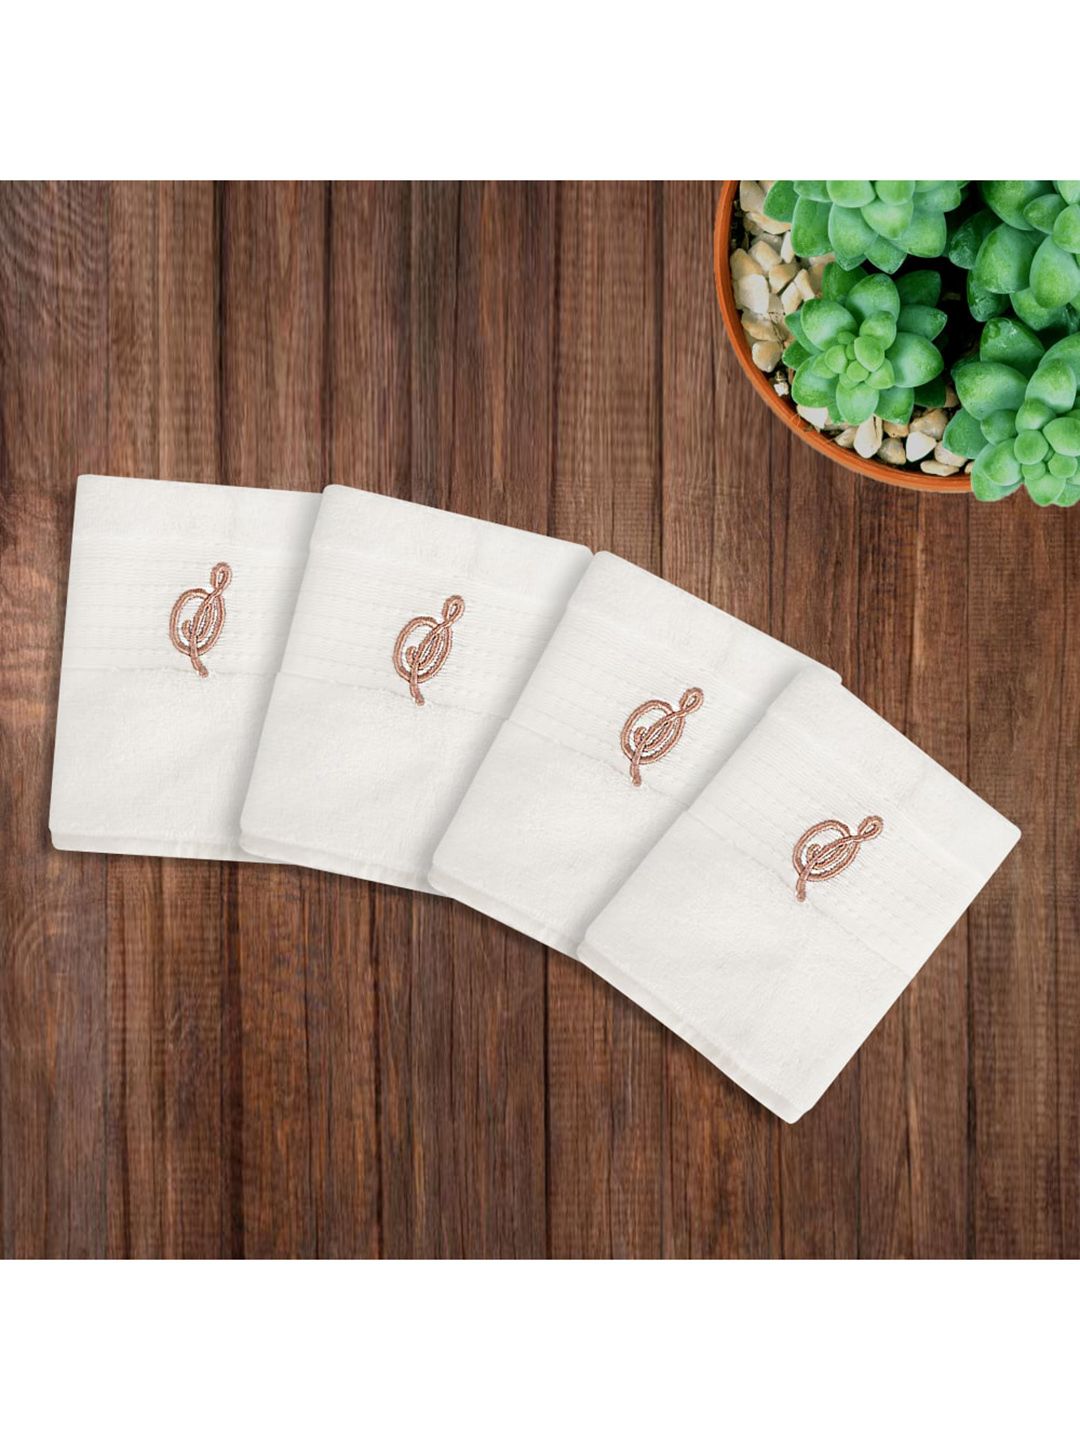 LUSH & BEYOND Set of 4 White 500 GSM Cotton Face Towels Price in India